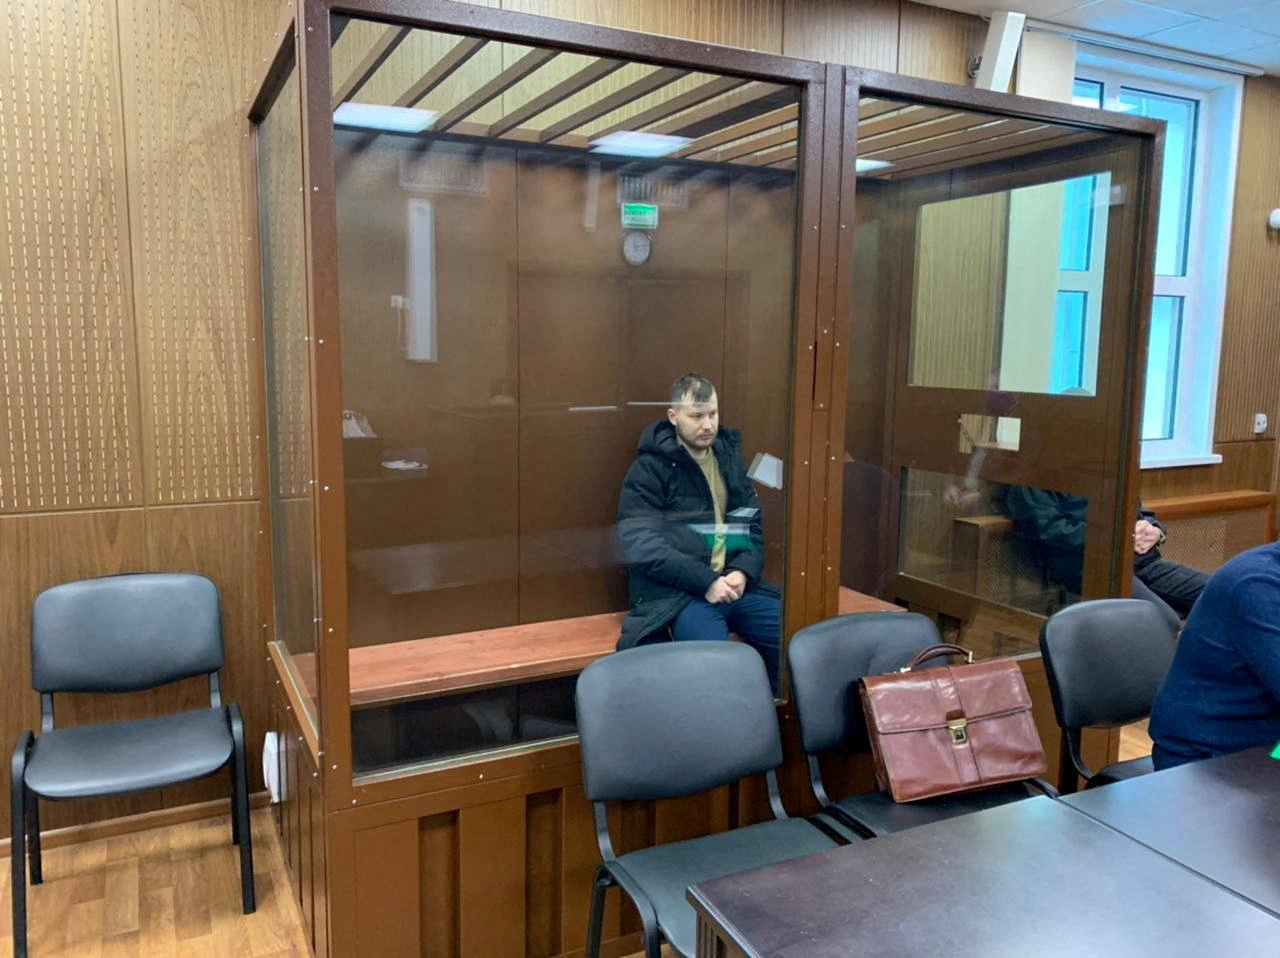 Ruslan Khansvyarov, detained on suspicion of the illegal circulation of means of payment, attends a court hearing in Moscow